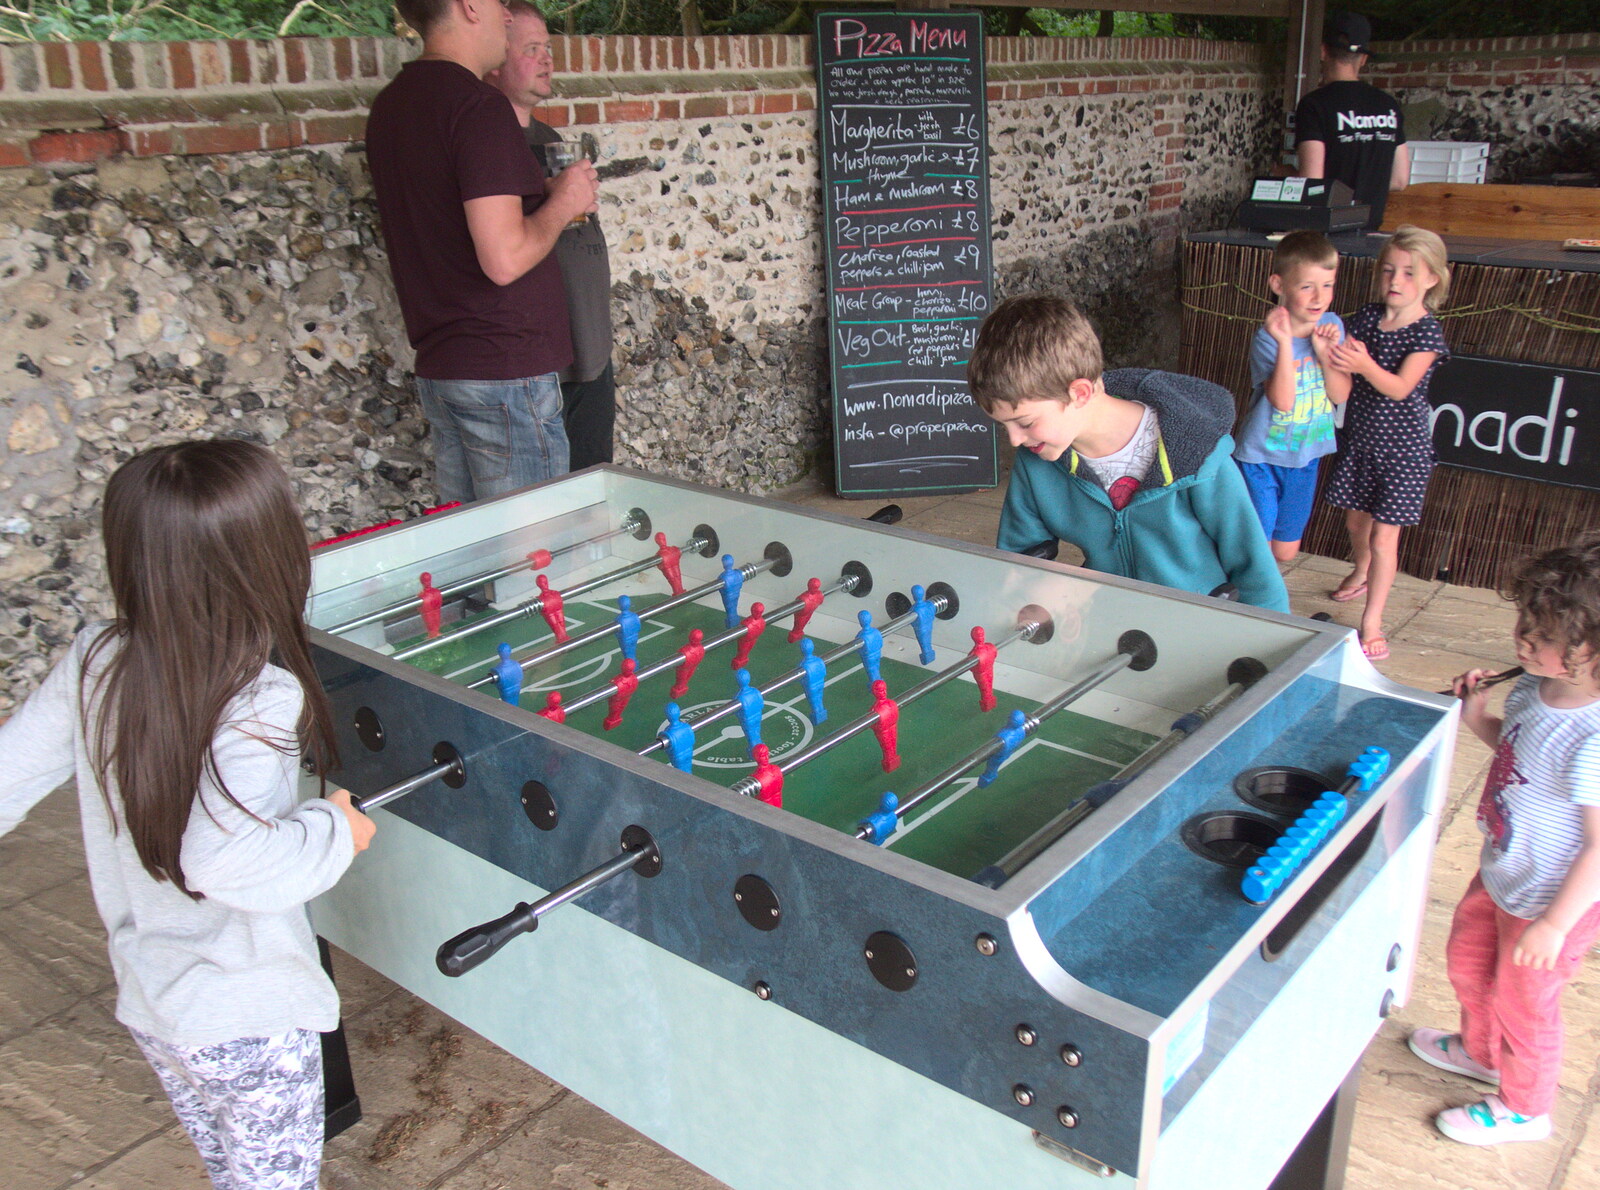 More table-football action from Dower House Camping, West Harling, Norfolk - 27th May 2018